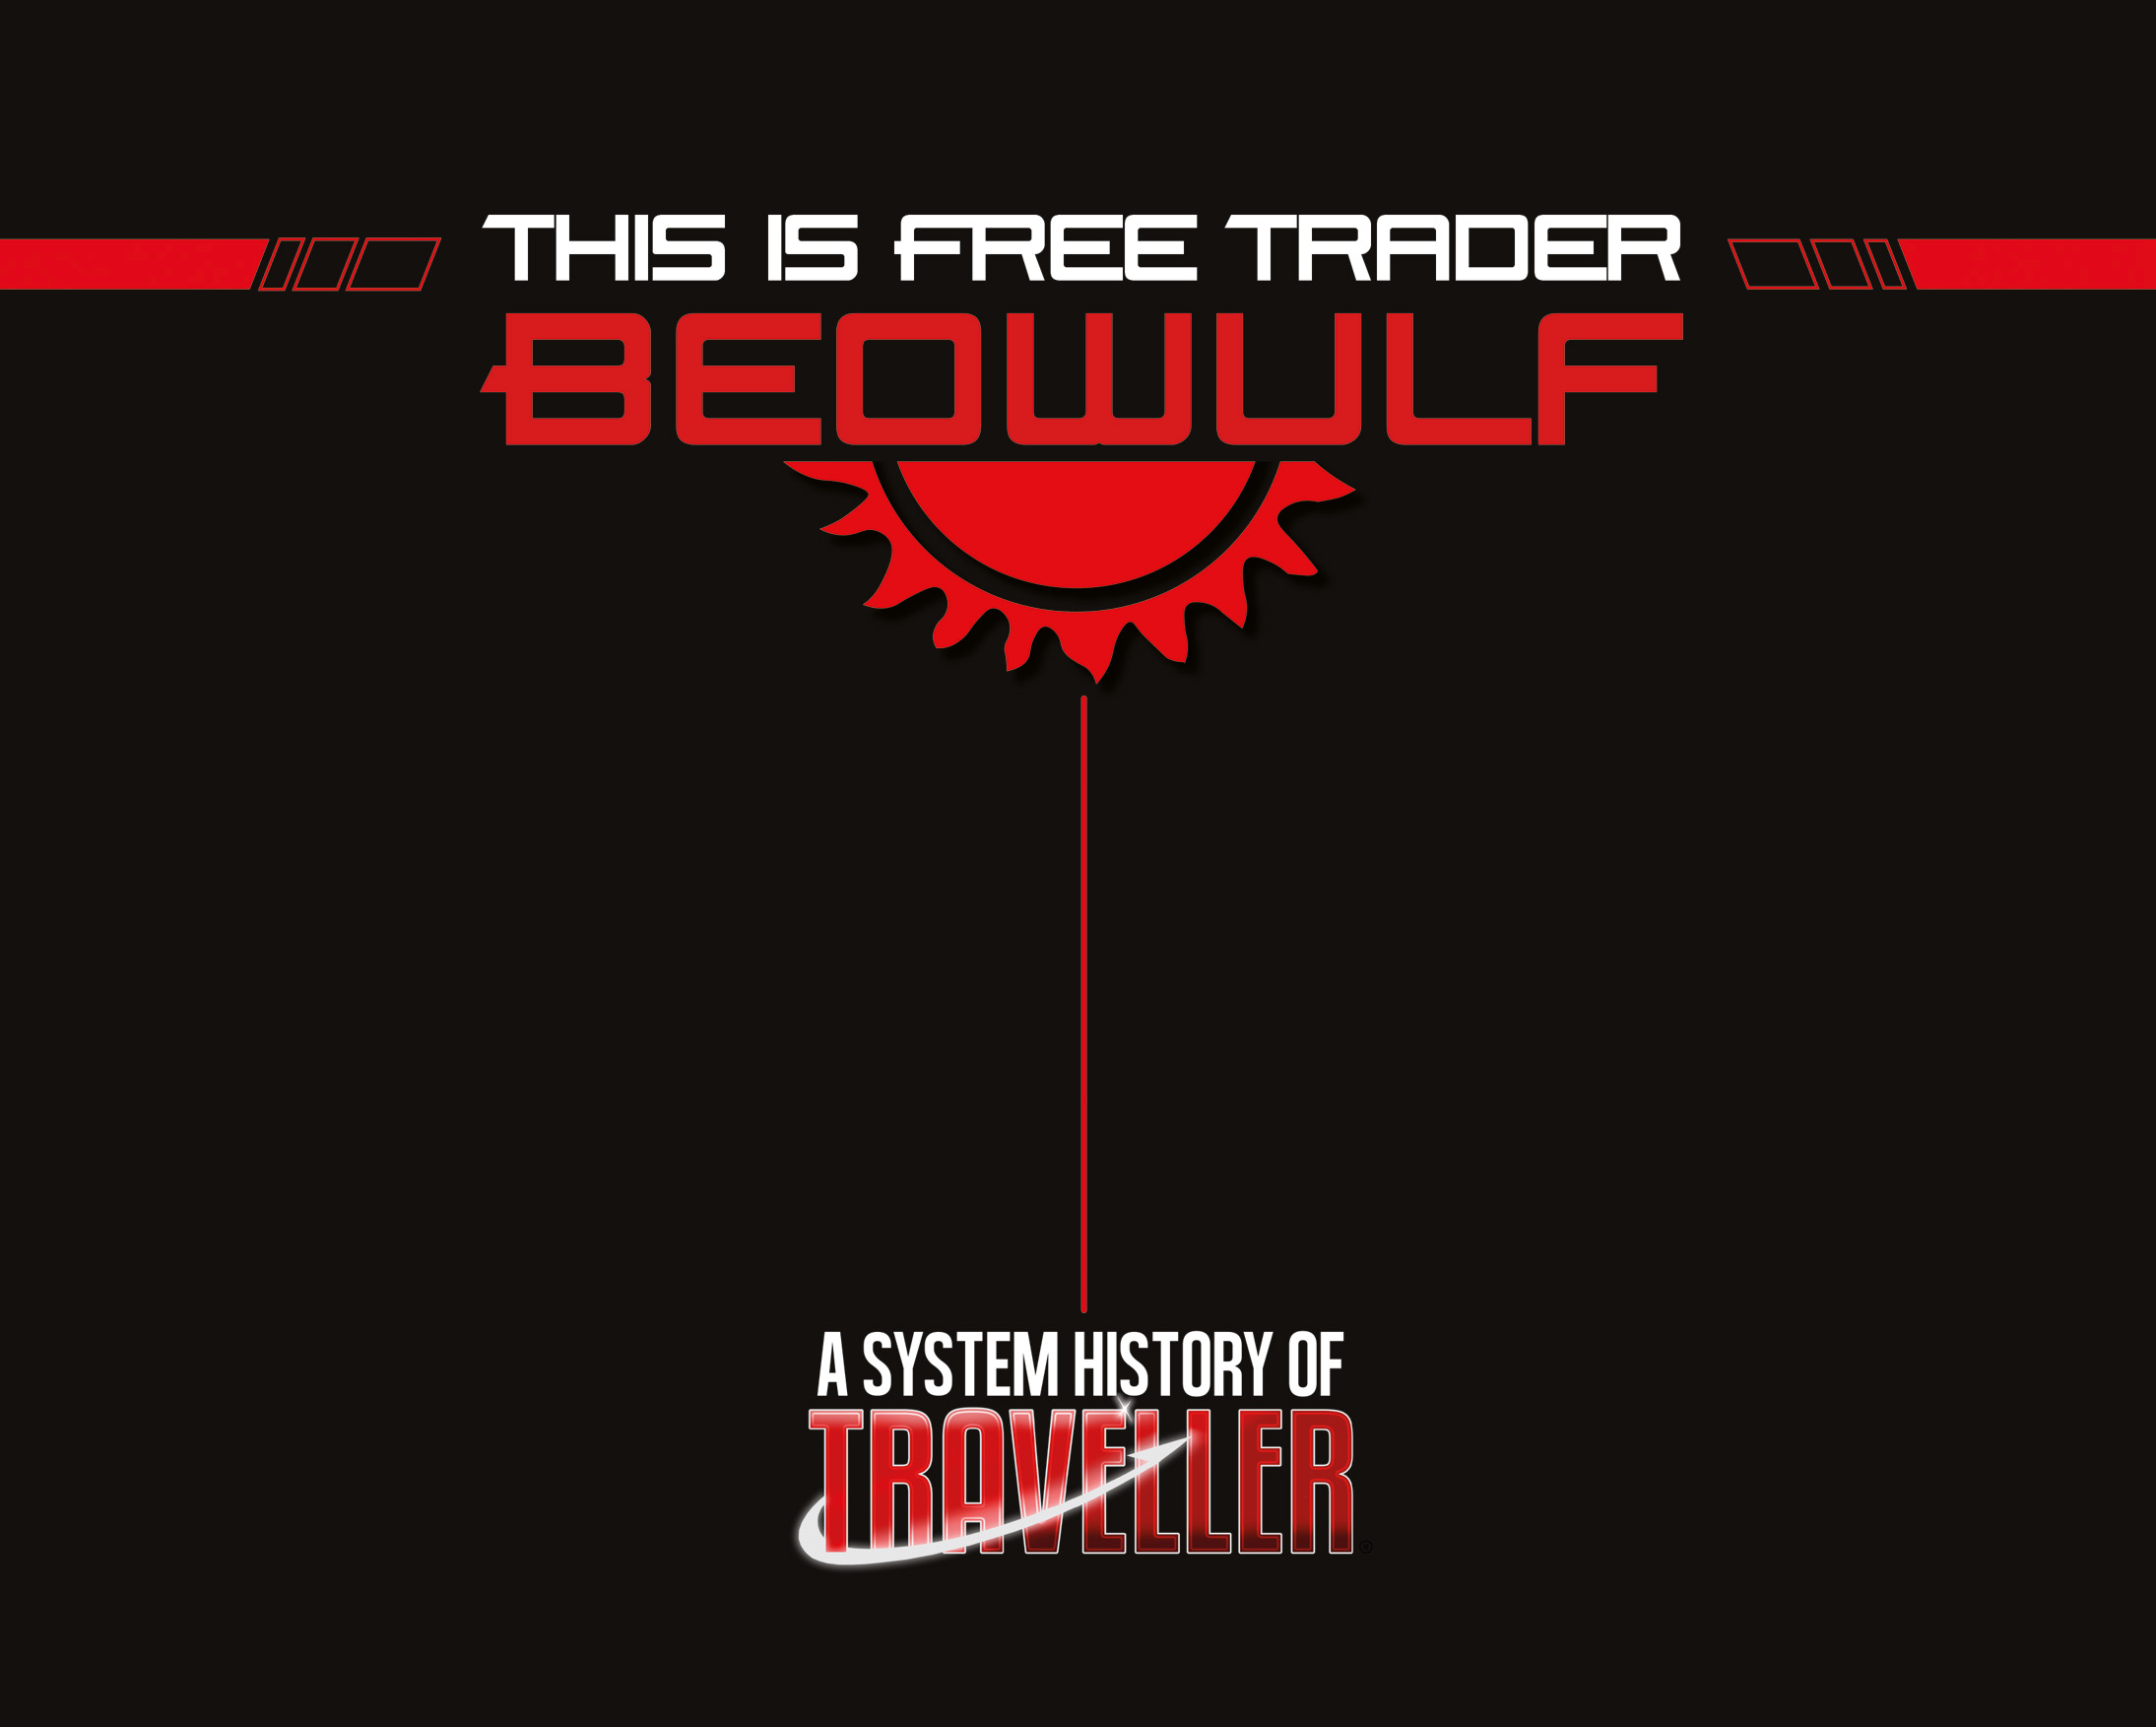 This is free trader beowulf book cover.jpg